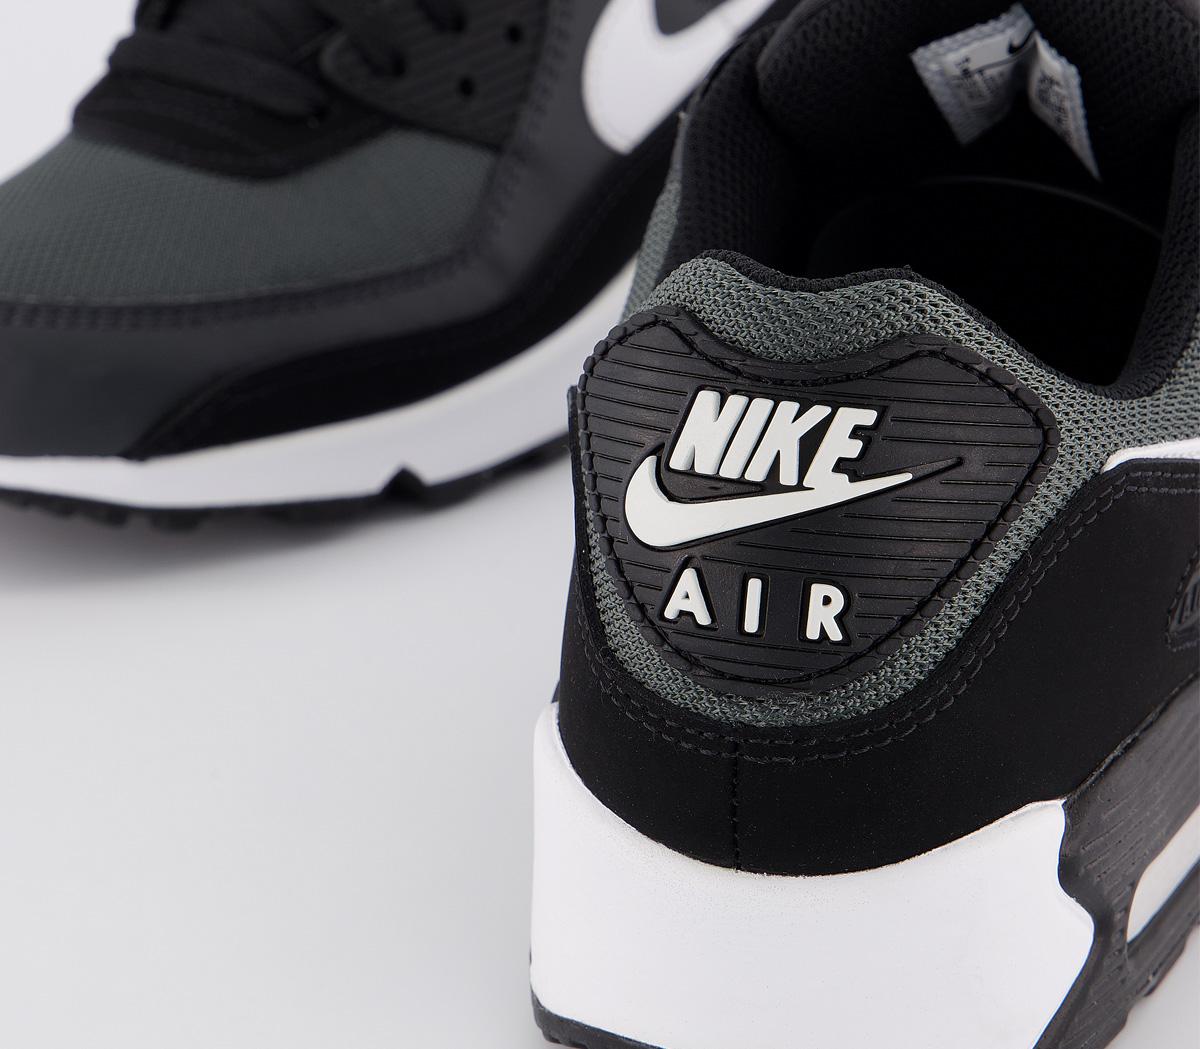 Nike Air Max 90 Trainers Black White Leather - Same Day Delivery